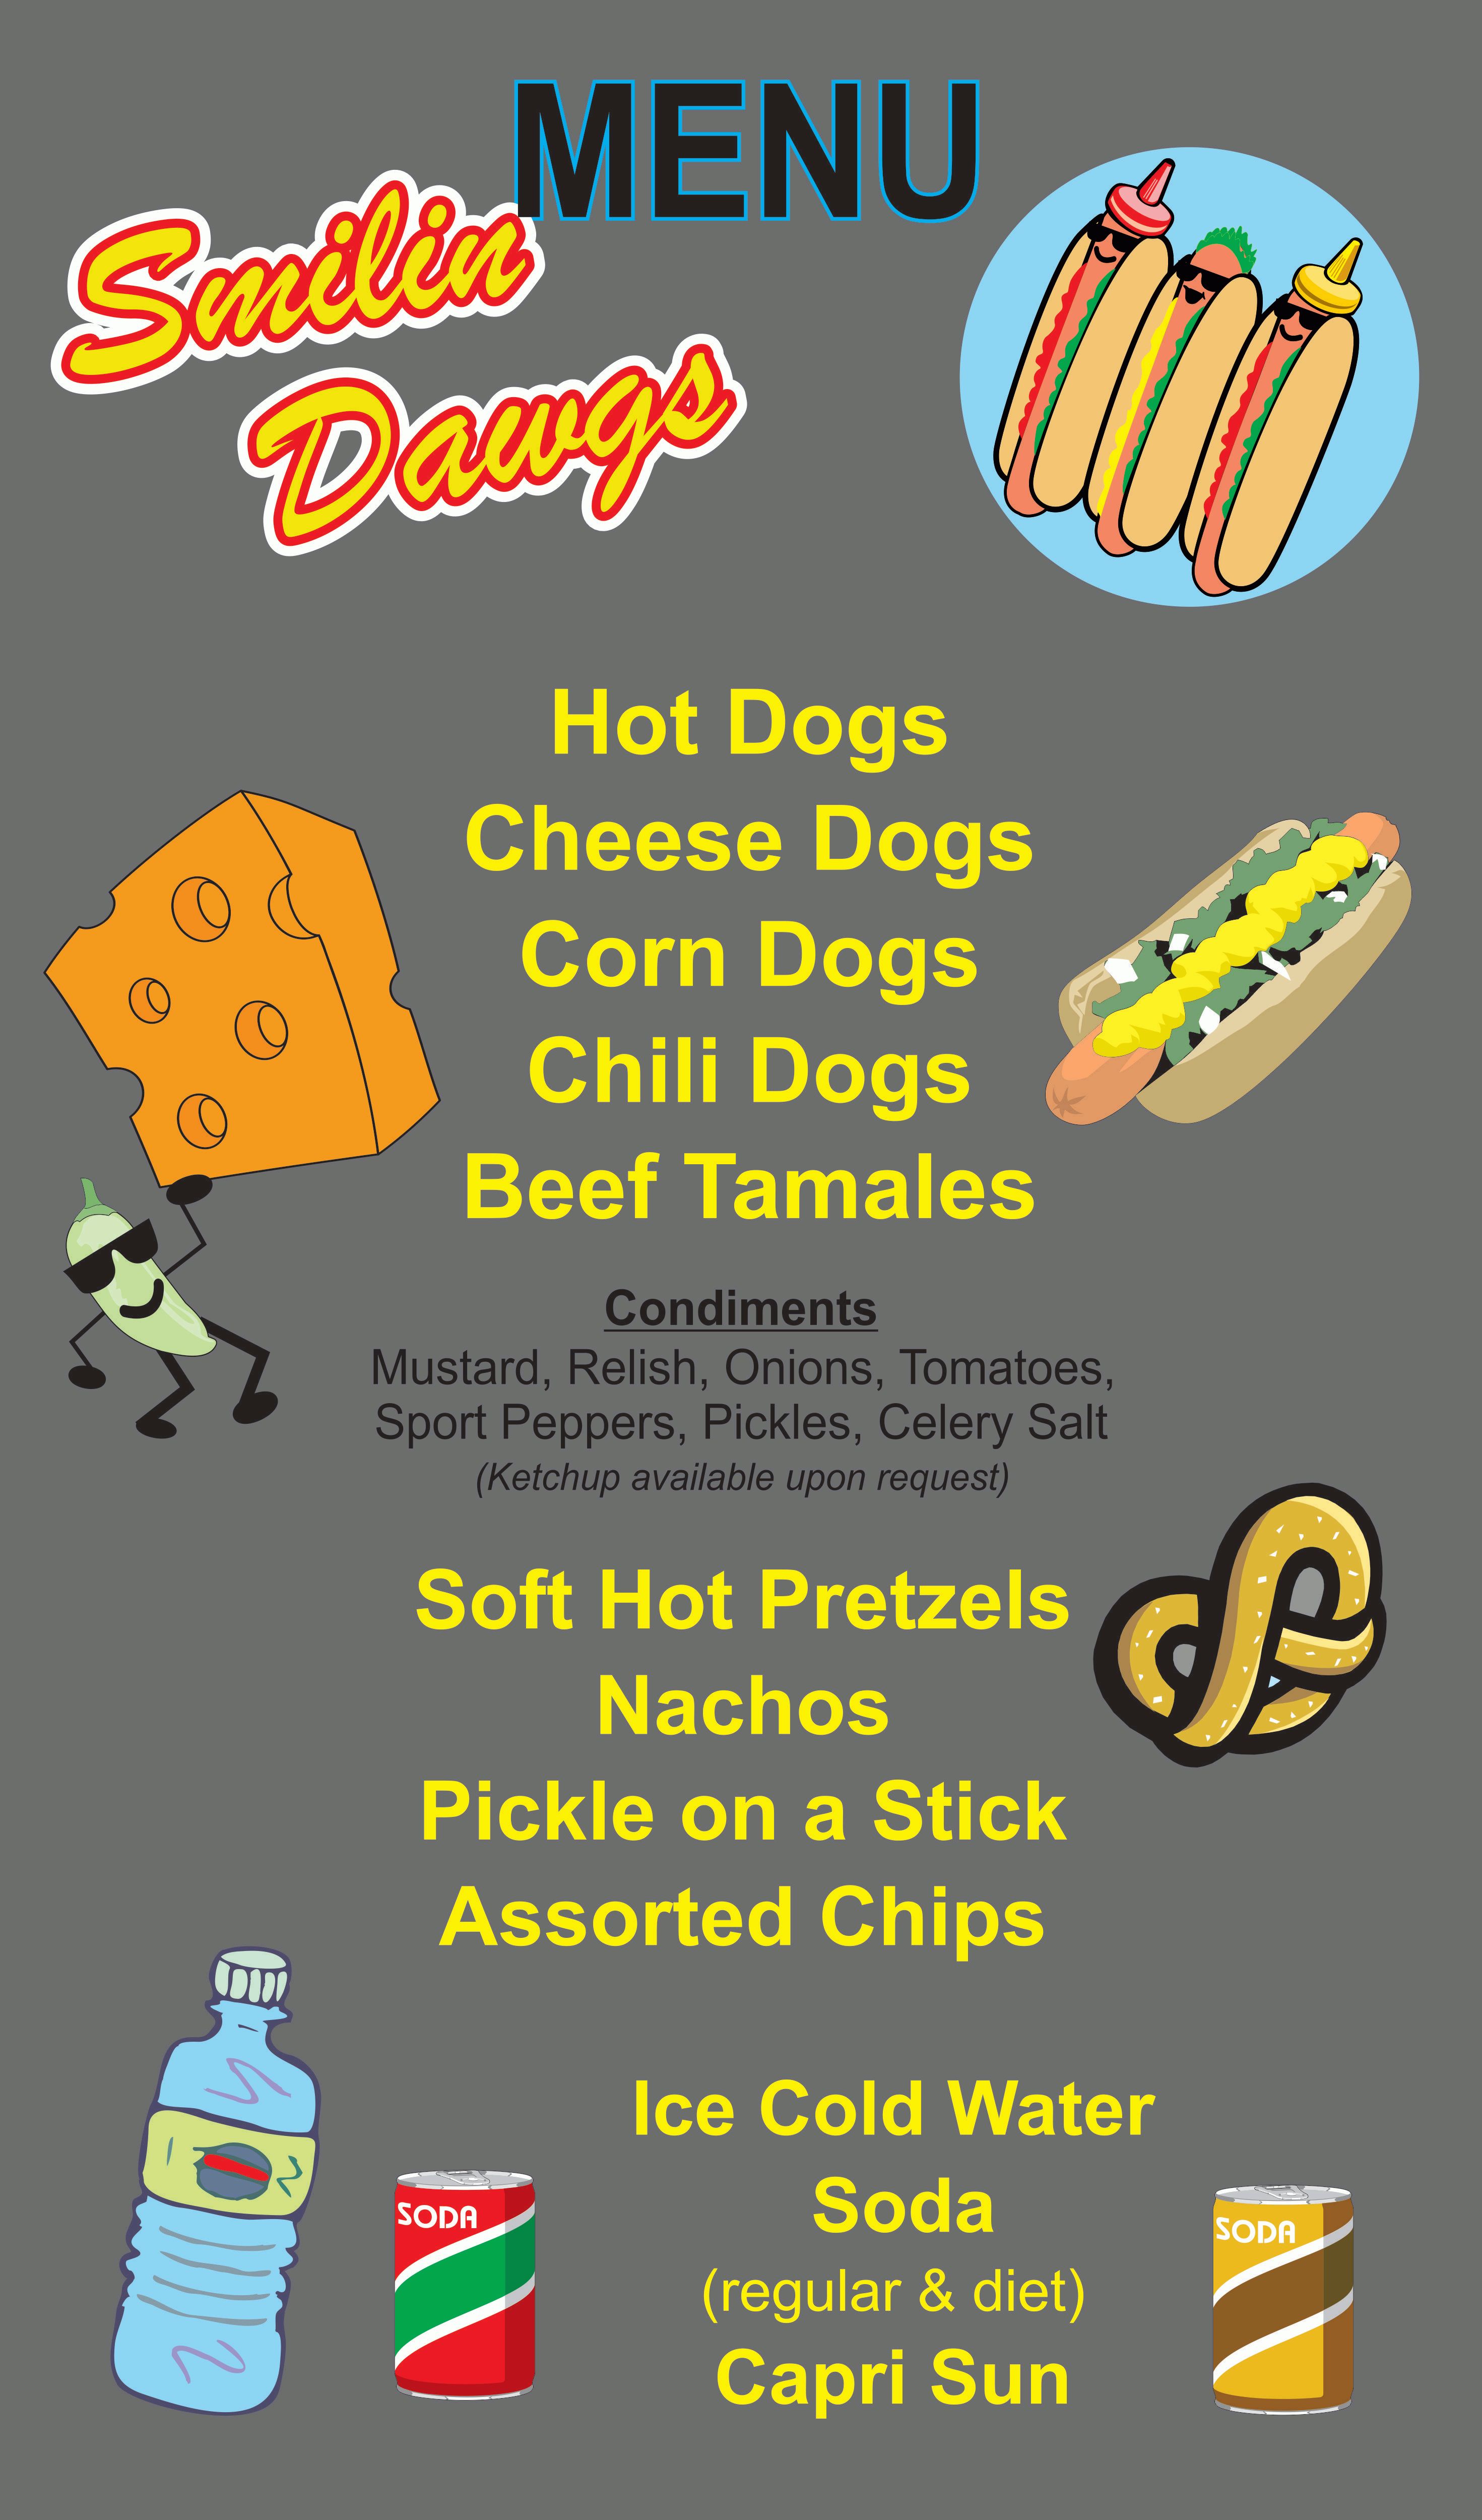 Smilin Dawgs Menu - Hot Dogs, Double Dogs, Corn Dog, Cheese Dog, Chili Dog, Polish, Nachos, Chili, Pickle on a Stick, Chips, Cookies, Regular & Diet Soda, Ice Cold Water, Juice Boxes, Gatorade